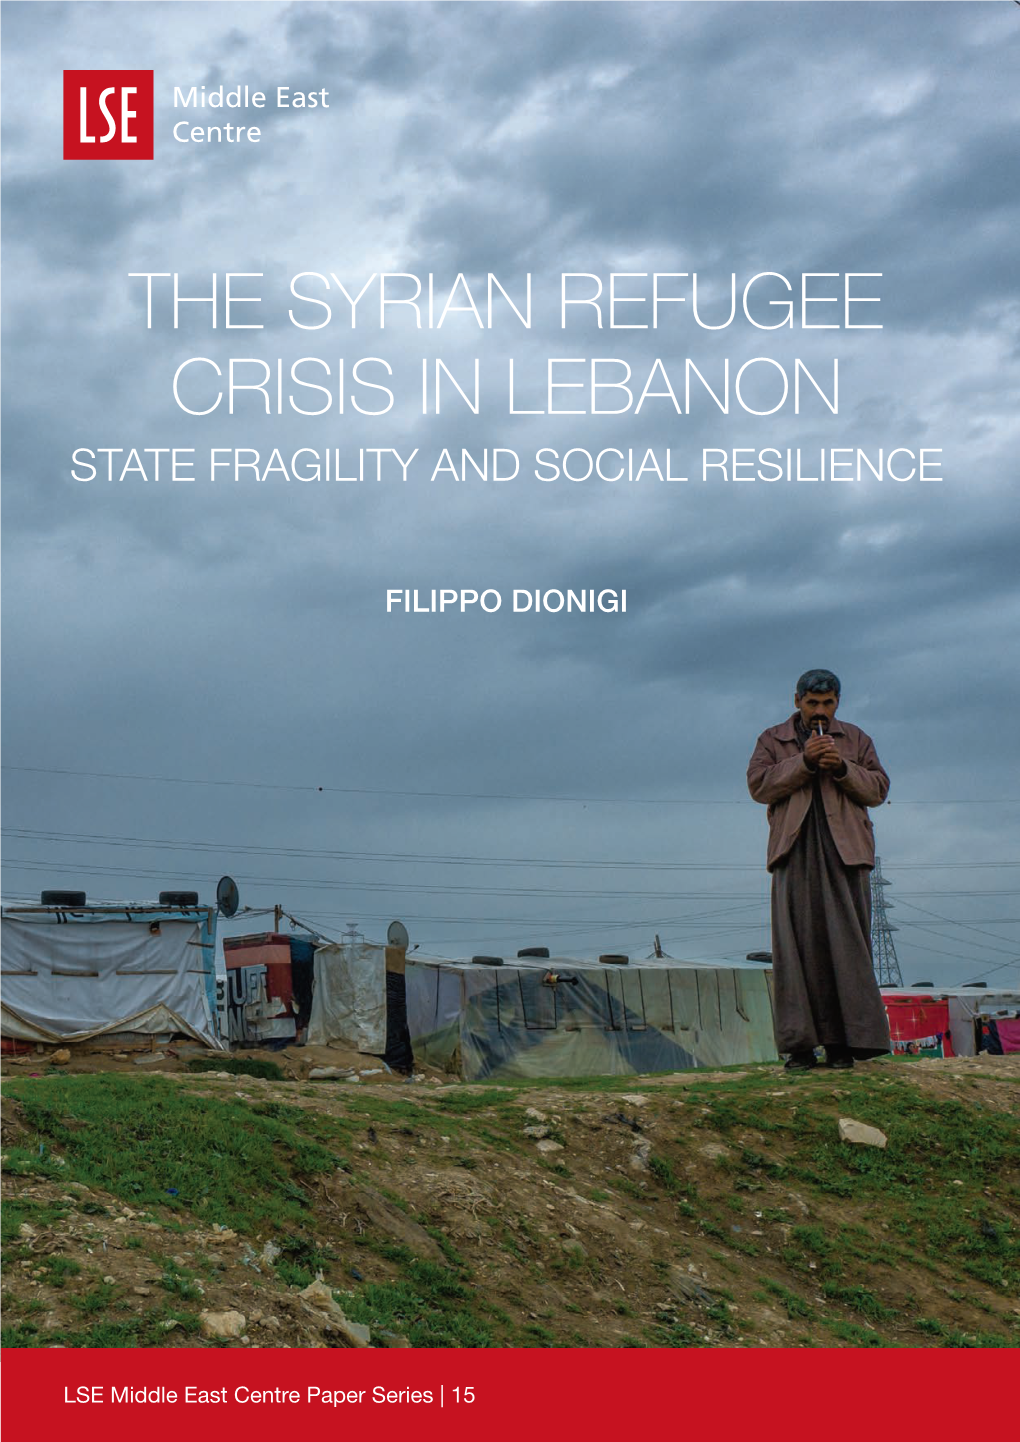 The Syrian Refugee Crisis in Lebanon State Fragility and Social Resilience